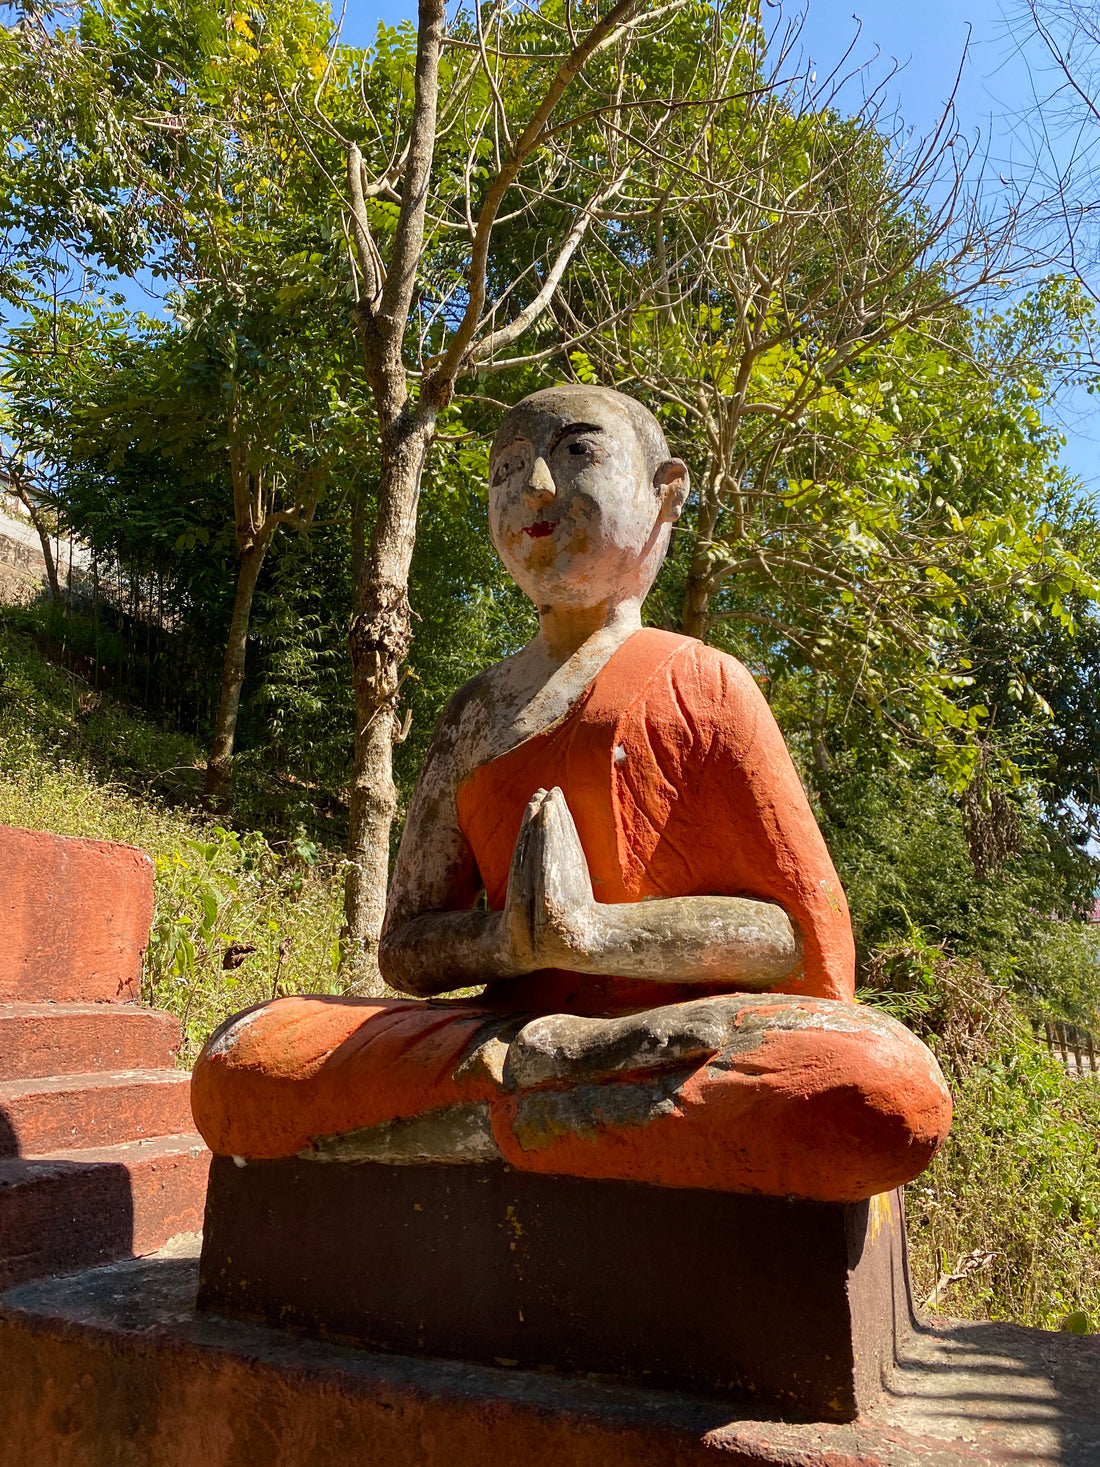 Unfinished Business Part 3 | Around Xishuangbanna